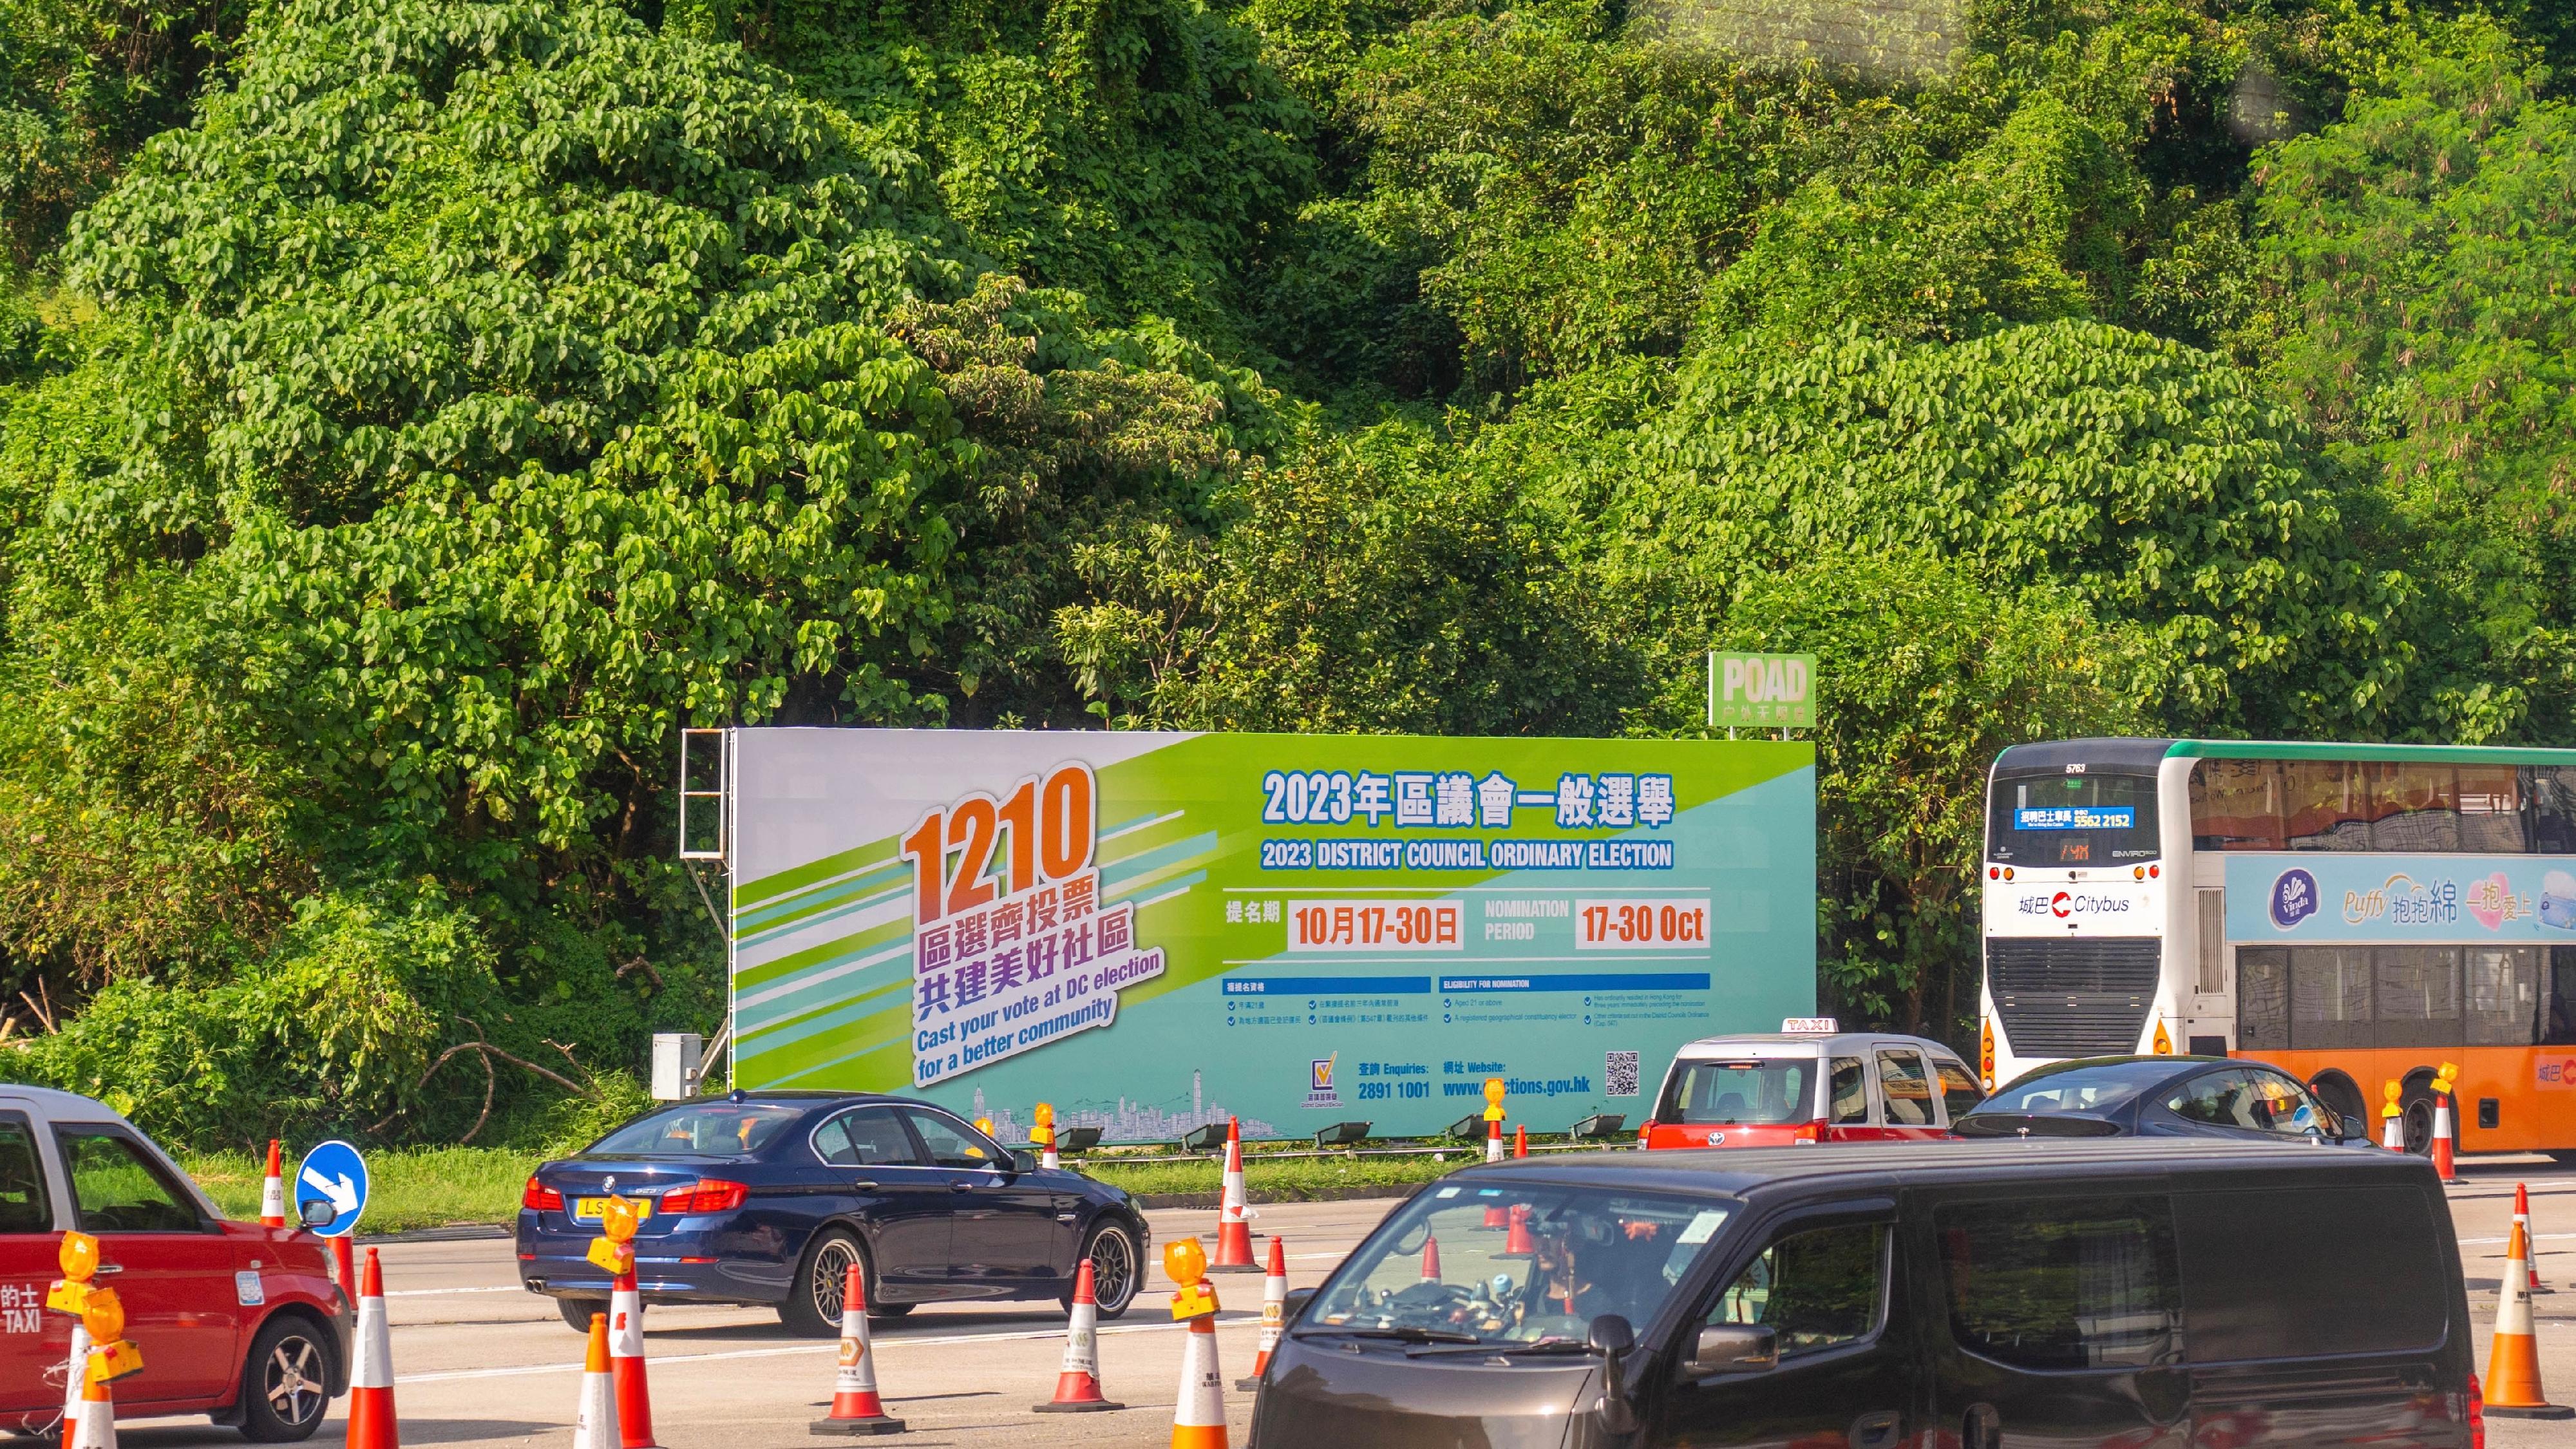 The 2023 District Council Ordinary Election will be held on December 10 (Sunday). The nomination period for the election started yesterday (October 17), and will continue until October 30. The Government has launched a publicity campaign for the nomination period that includes displays of giant banners in different districts.